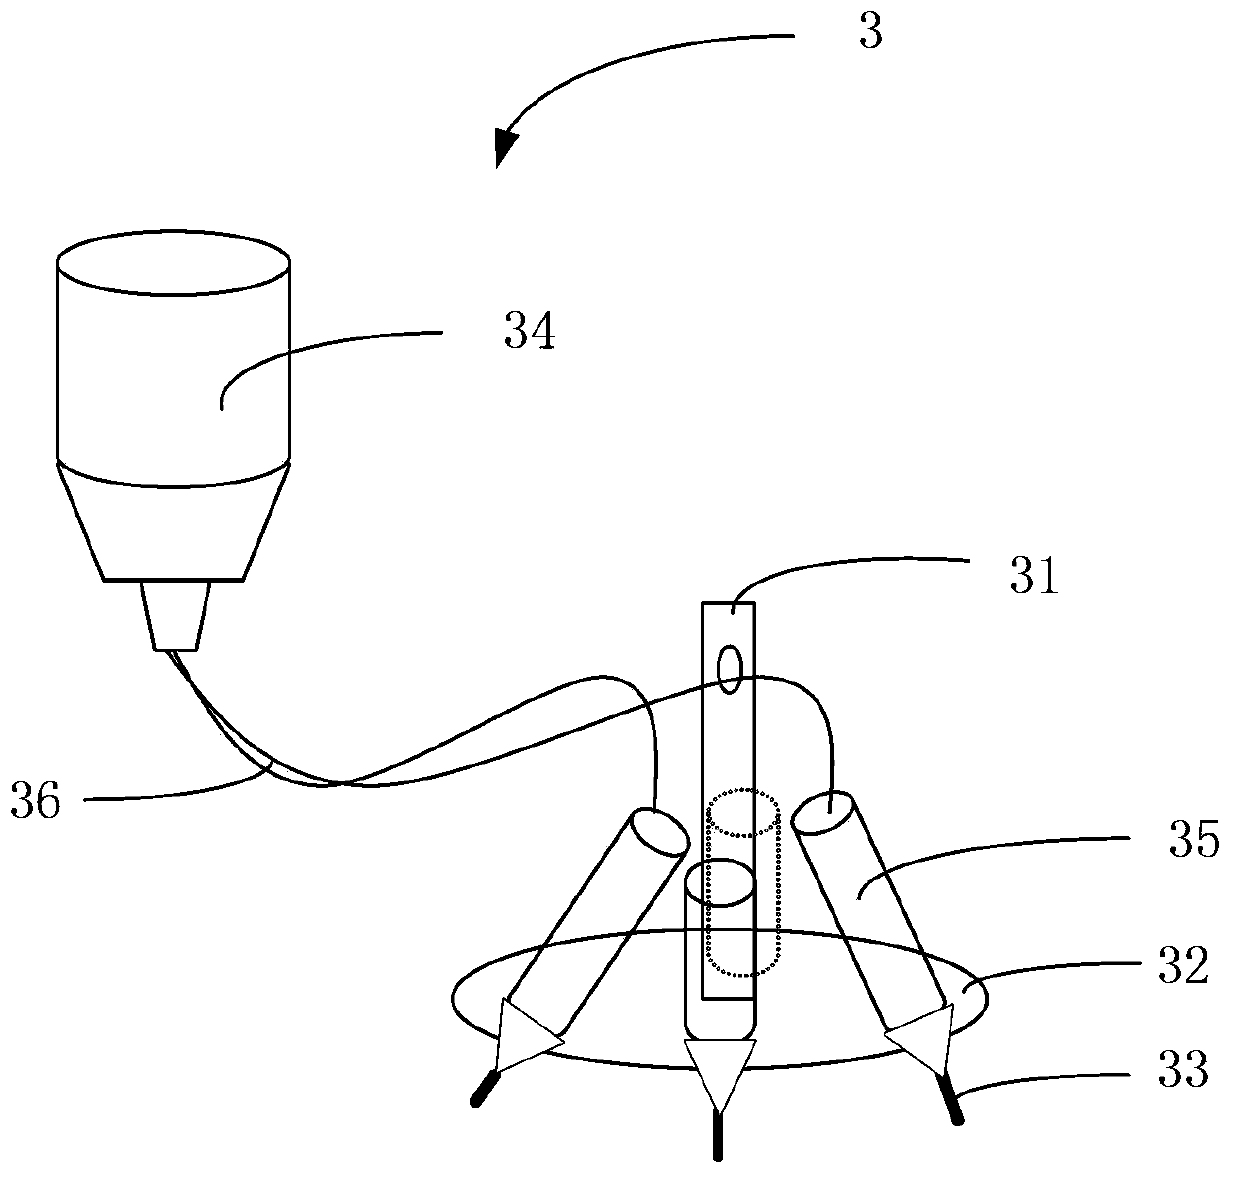 Scratched mask repair apparatus and method